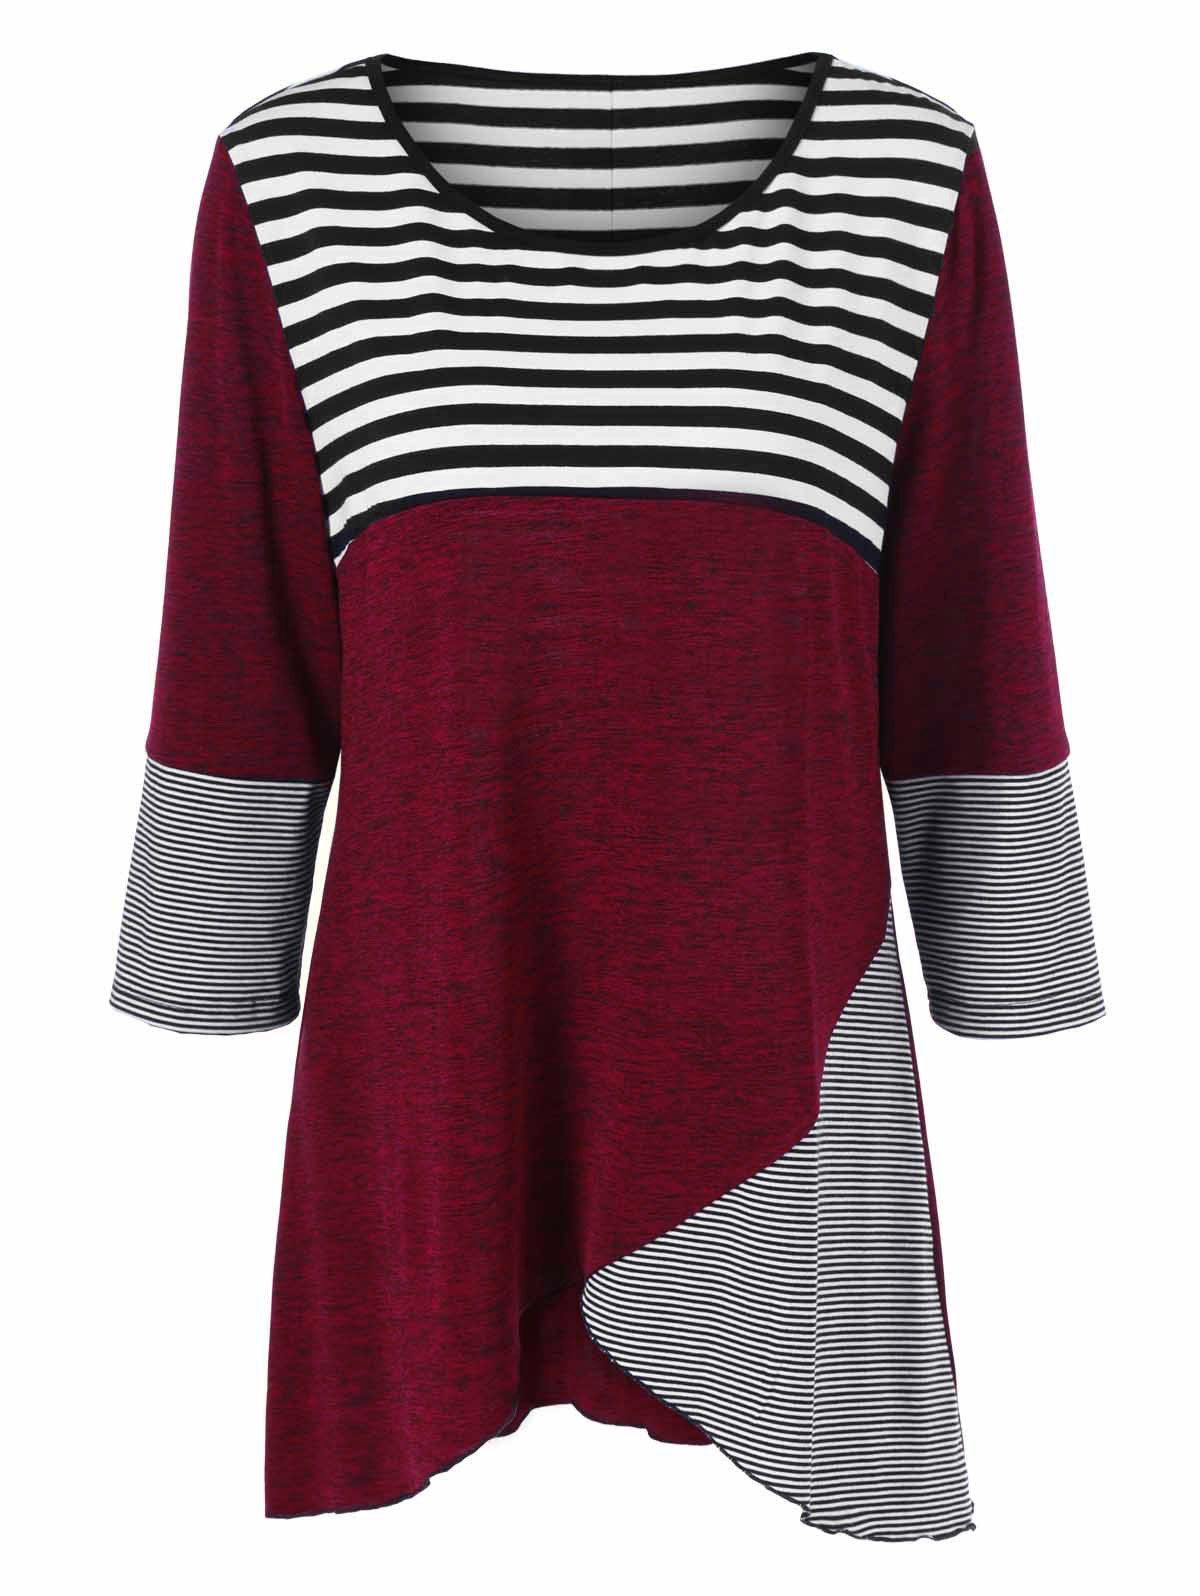 [20% OFF] Plus Size Striped Tunic T-Shirt | Rosegal